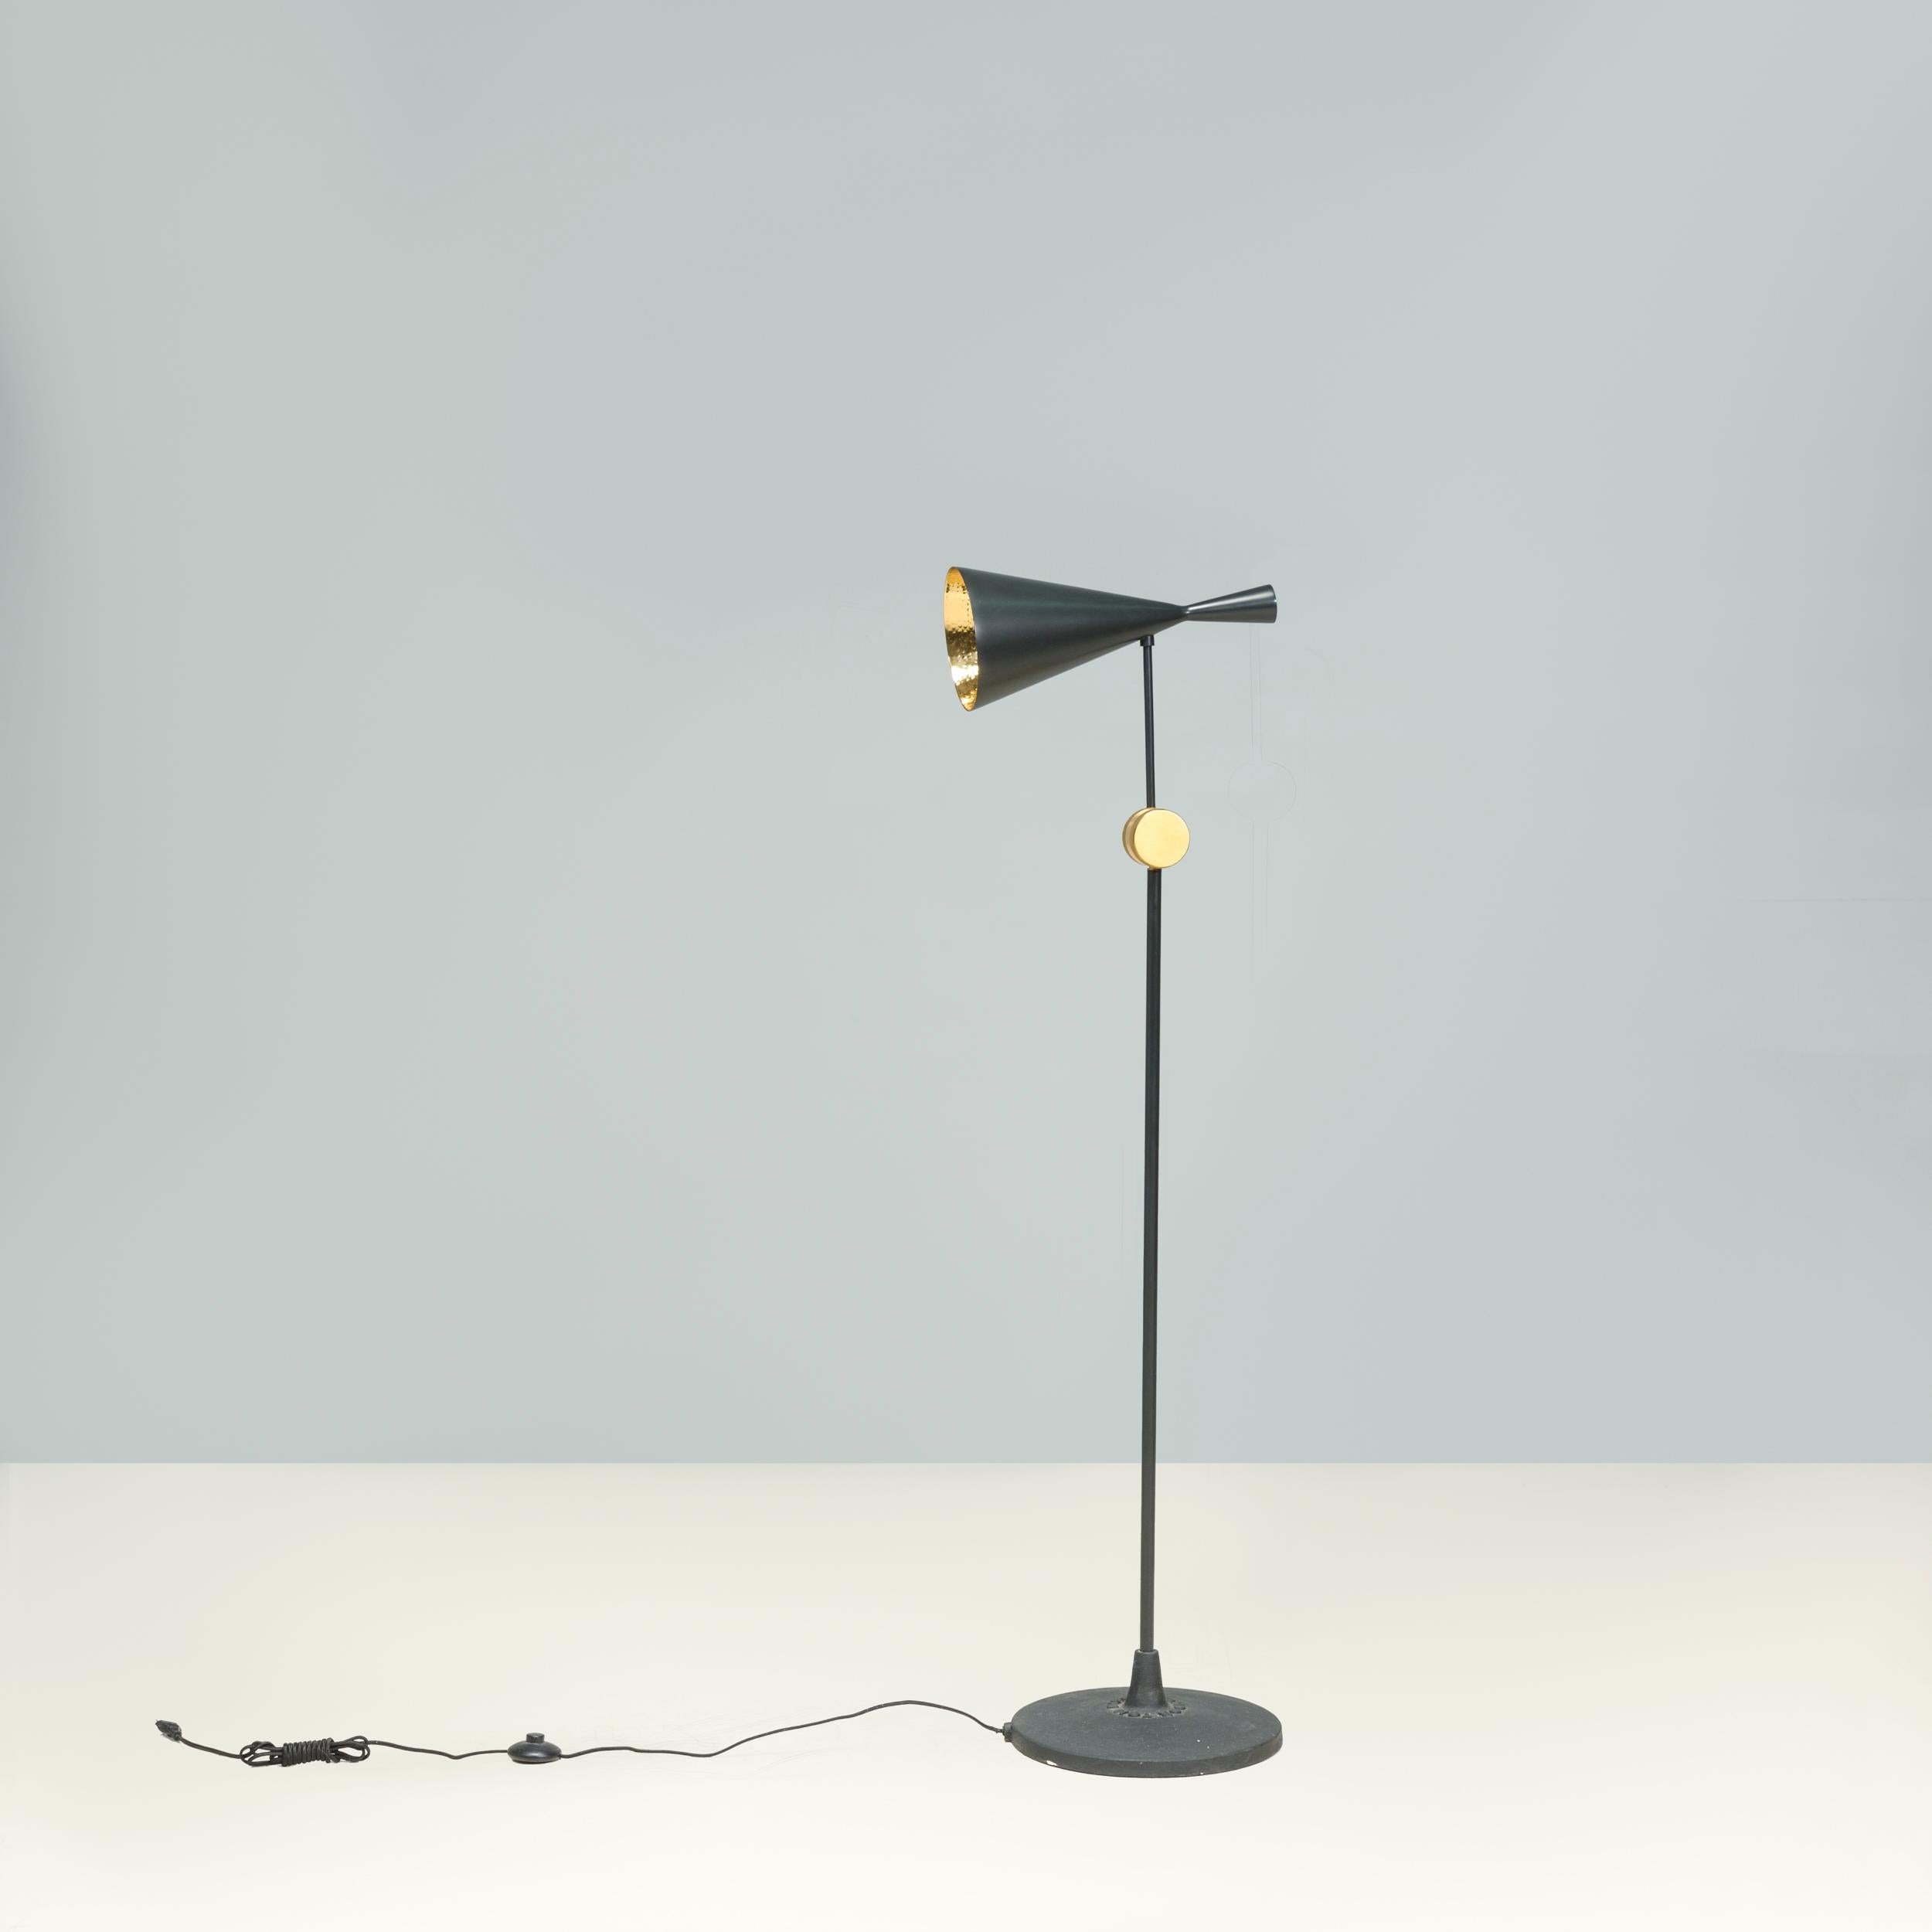 Designed by Tom Dixon, one of the best known British designers of the 21st century, the Beat lighting collection combines quality materials with a sleek aesthetic.

The floor lamp is handmade in Moradabad in Northern India, using the traditional